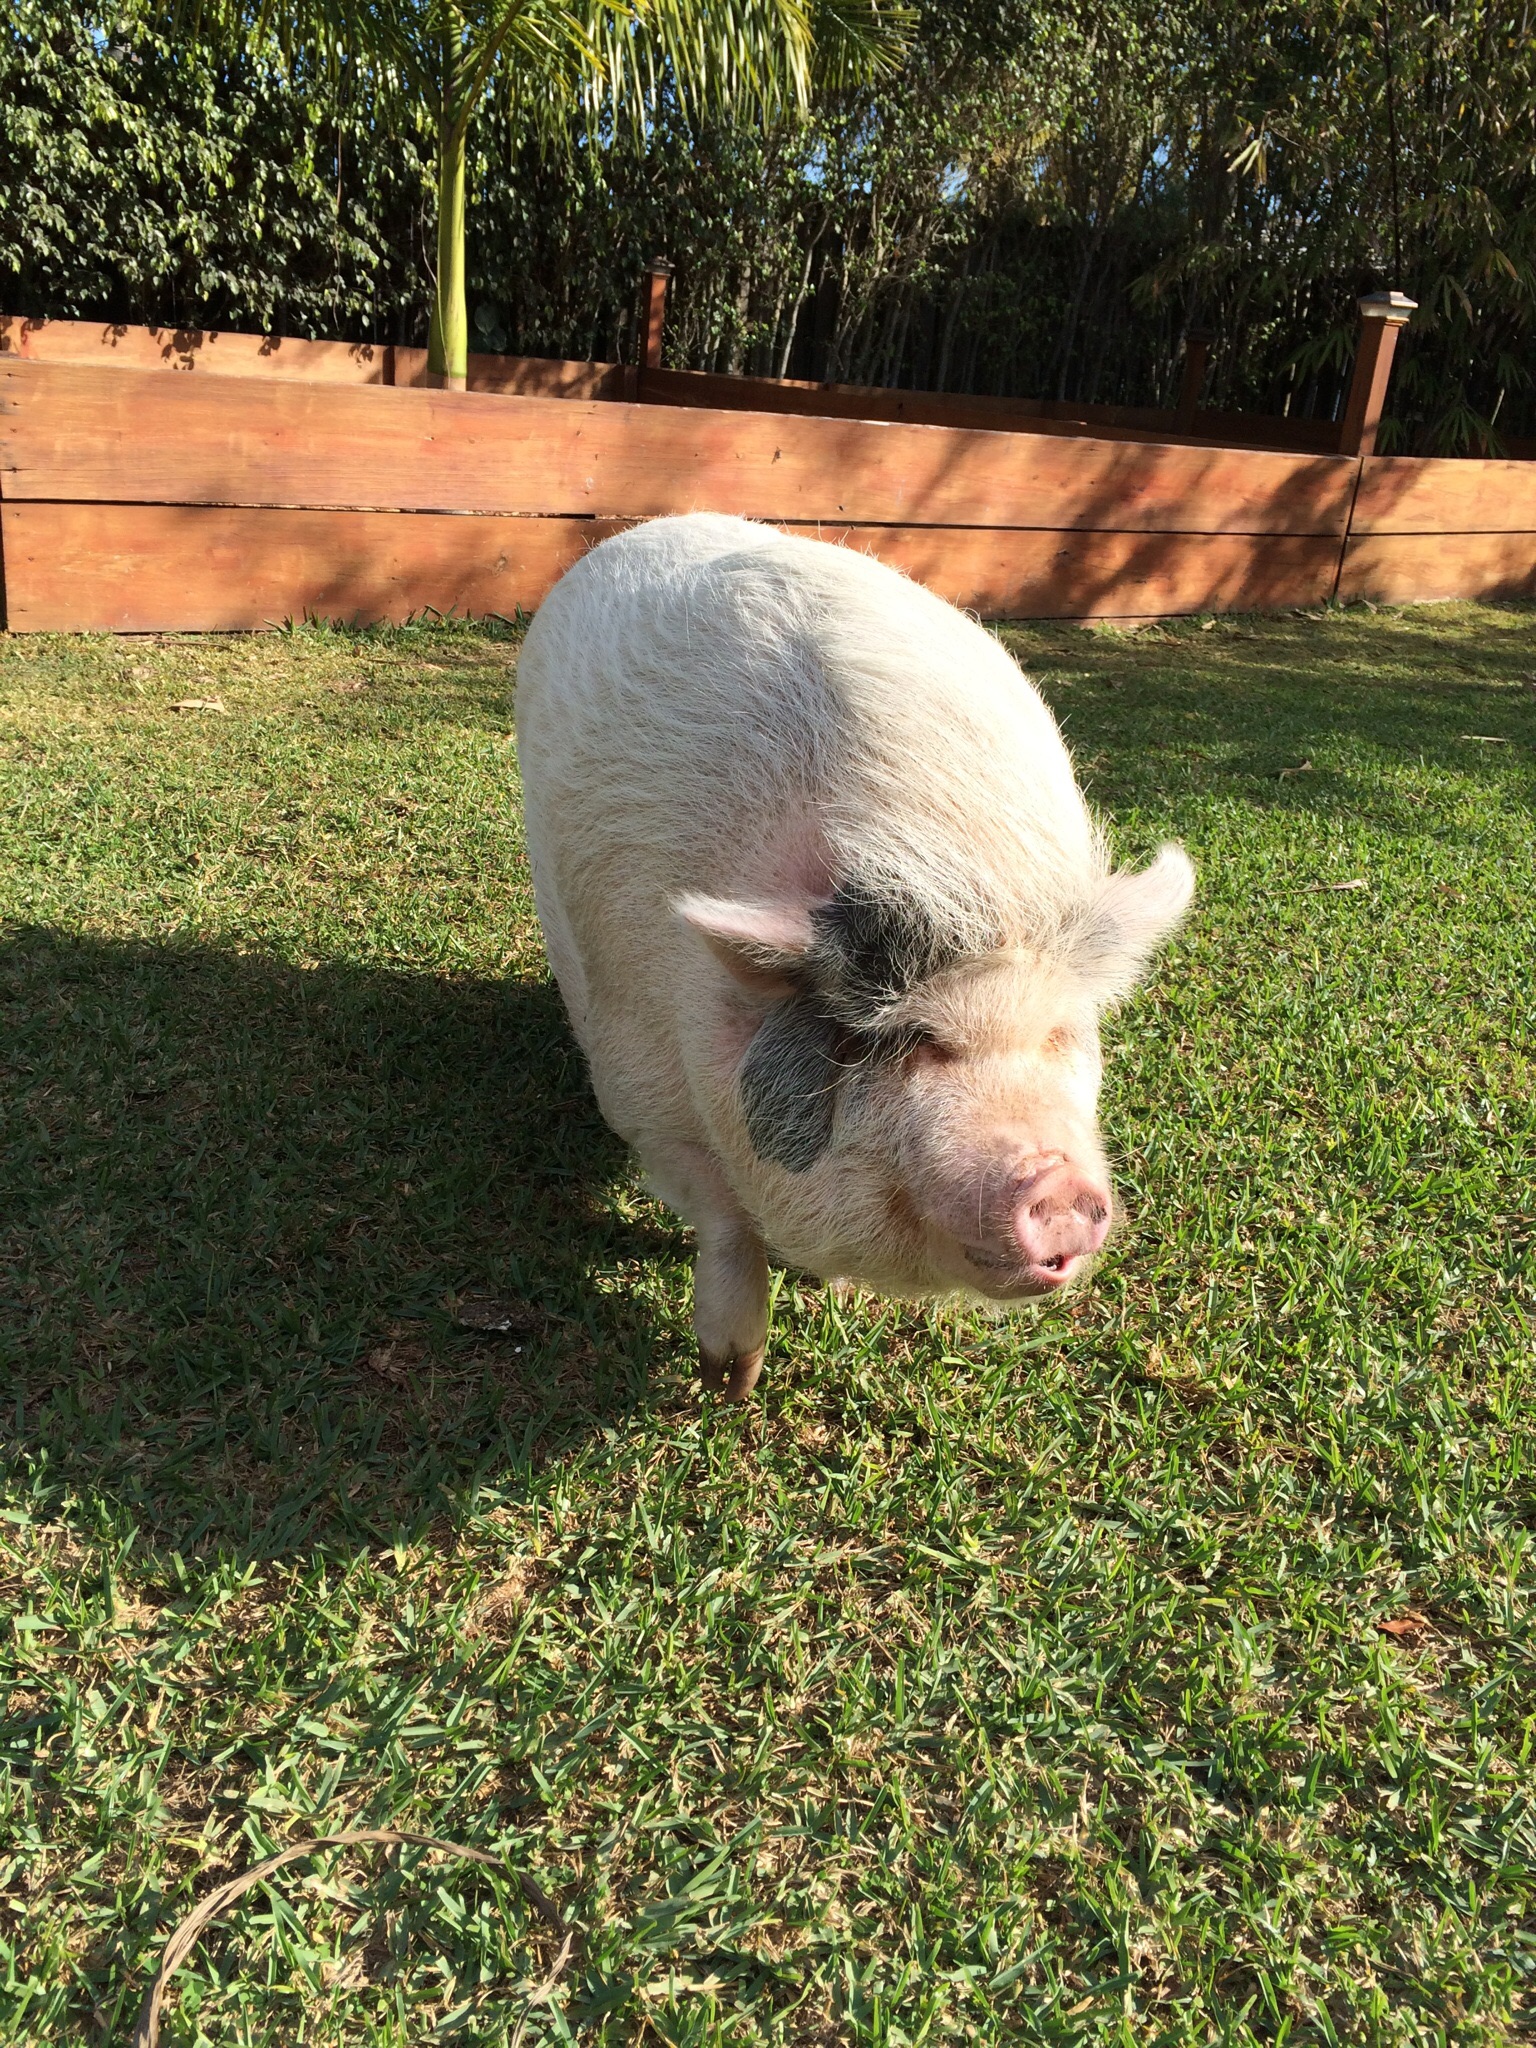 Our potbellied pig